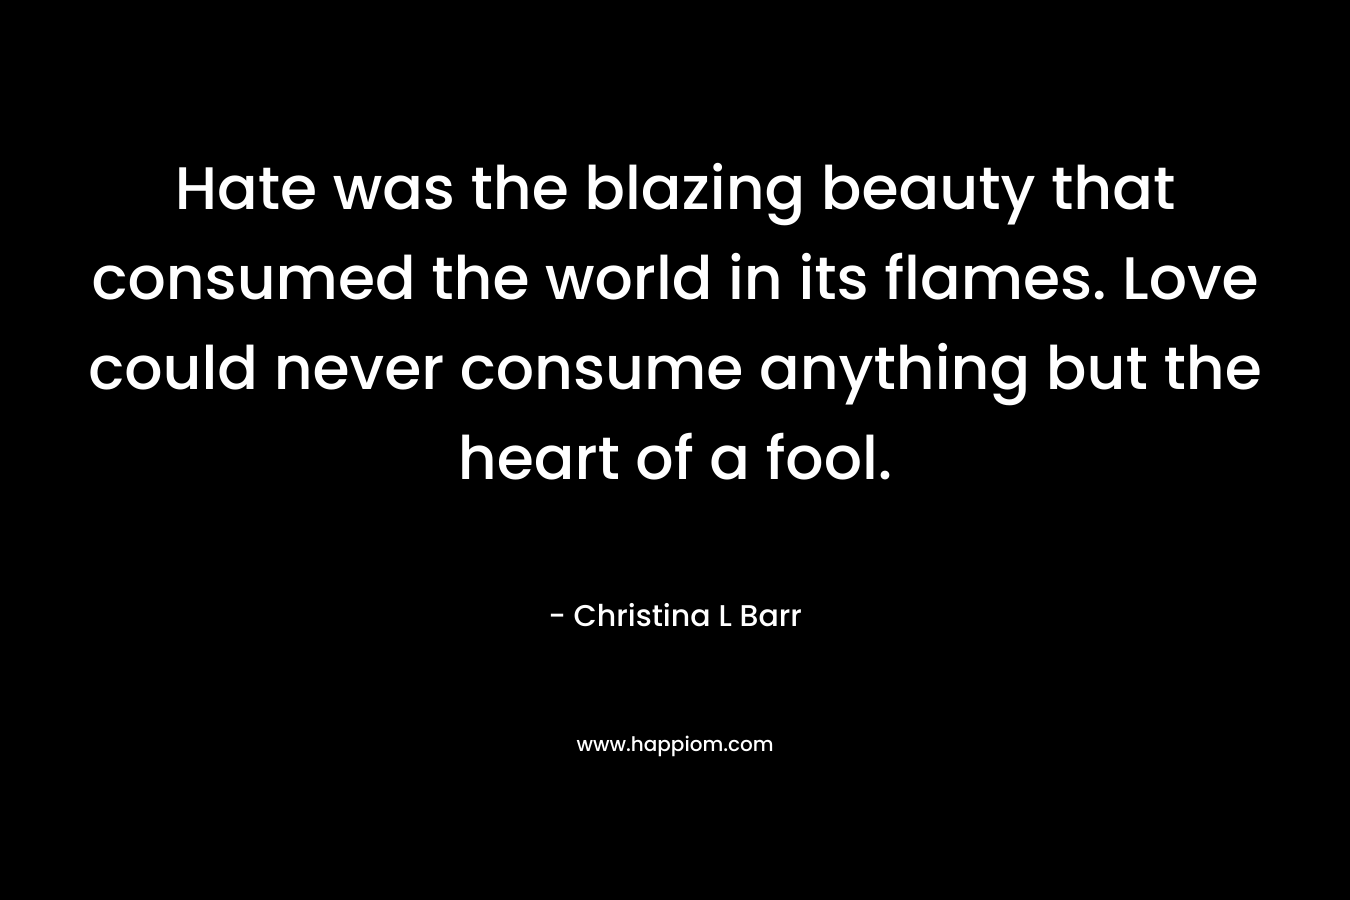 Hate was the blazing beauty that consumed the world in its flames. Love could never consume anything but the heart of a fool. – Christina L Barr